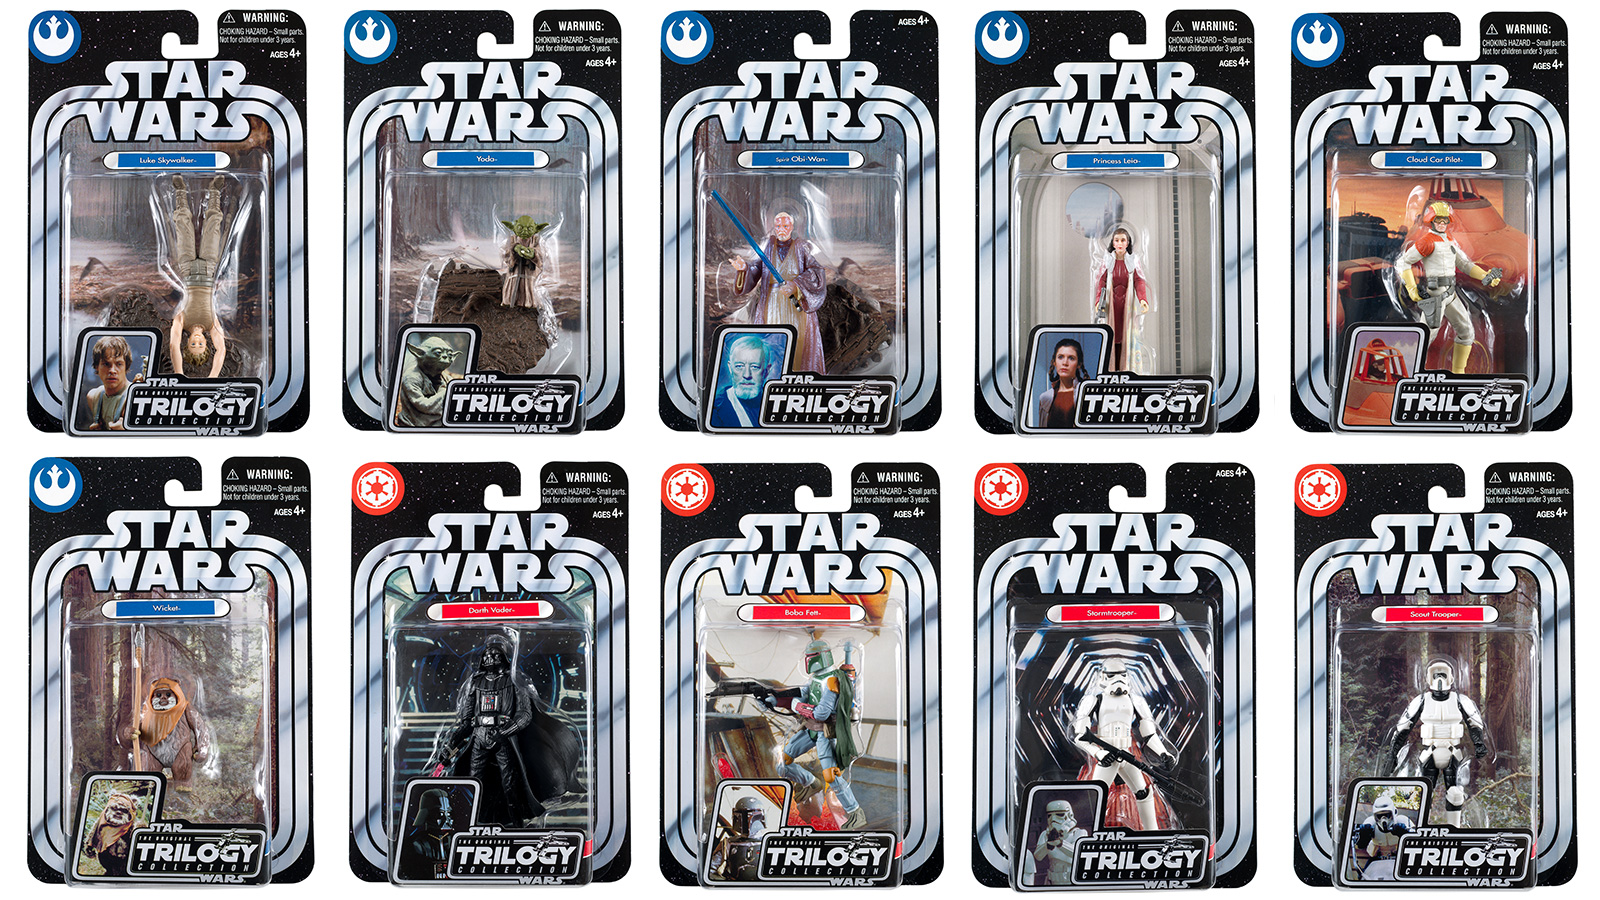 Photo Gallery Update - The Original Trilogy Collection Figures #01 - #19 Added